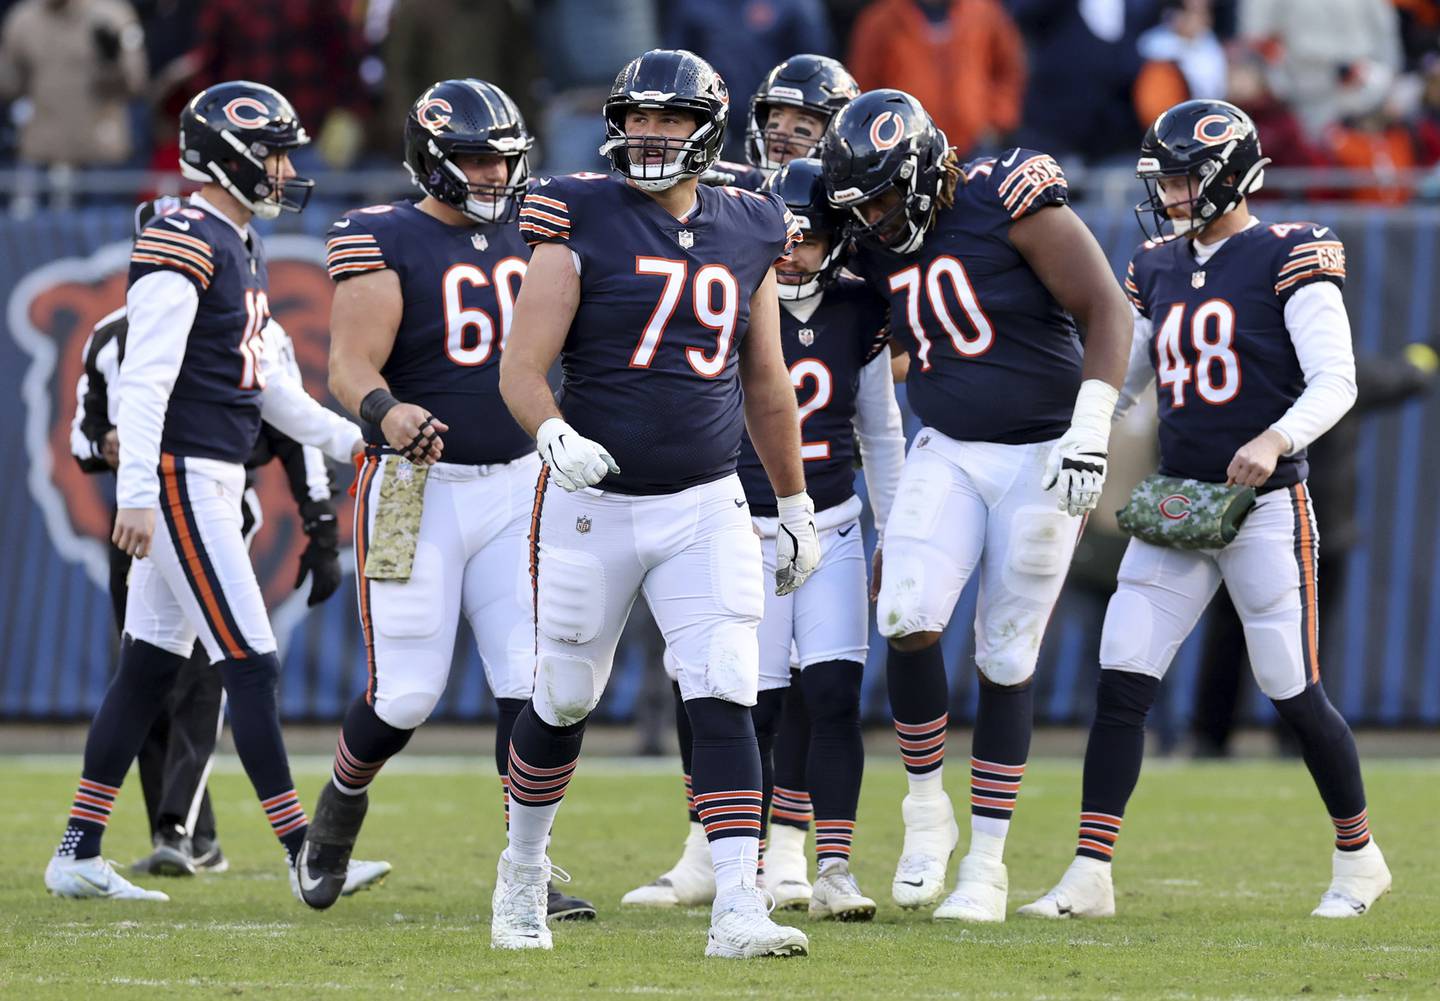 Bears kicker Cairo Santos walks back to the bench after failing to score on an extra point in the fourth quarter on Nov. 13, 2022.